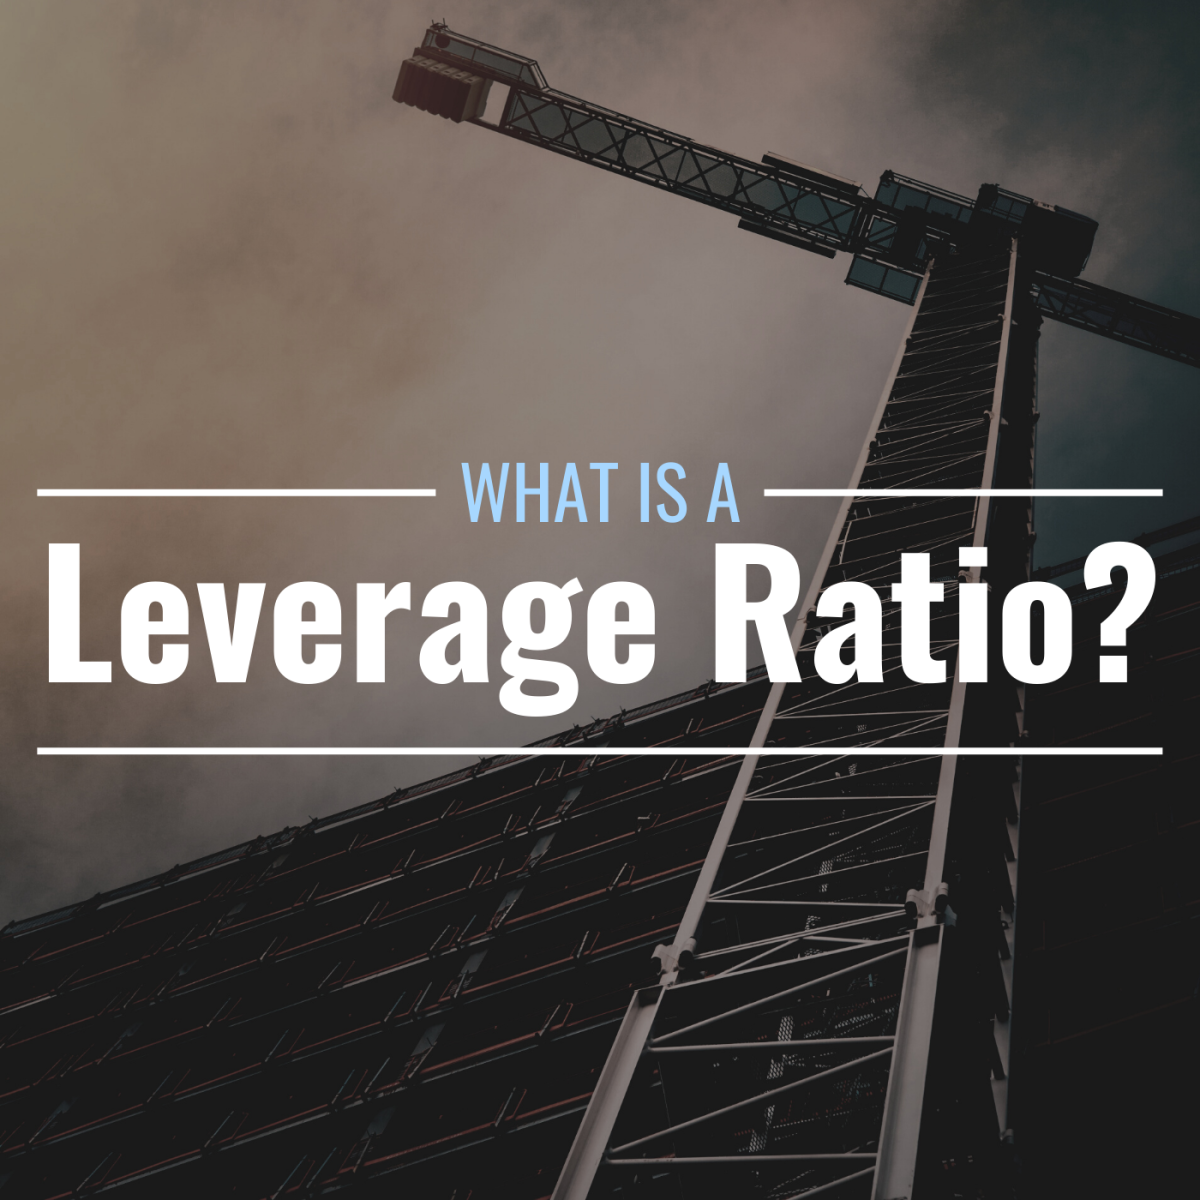 Darkened photo of a crane and a building under construction with text overlay that reads "What Is a Leverage Ratio?"